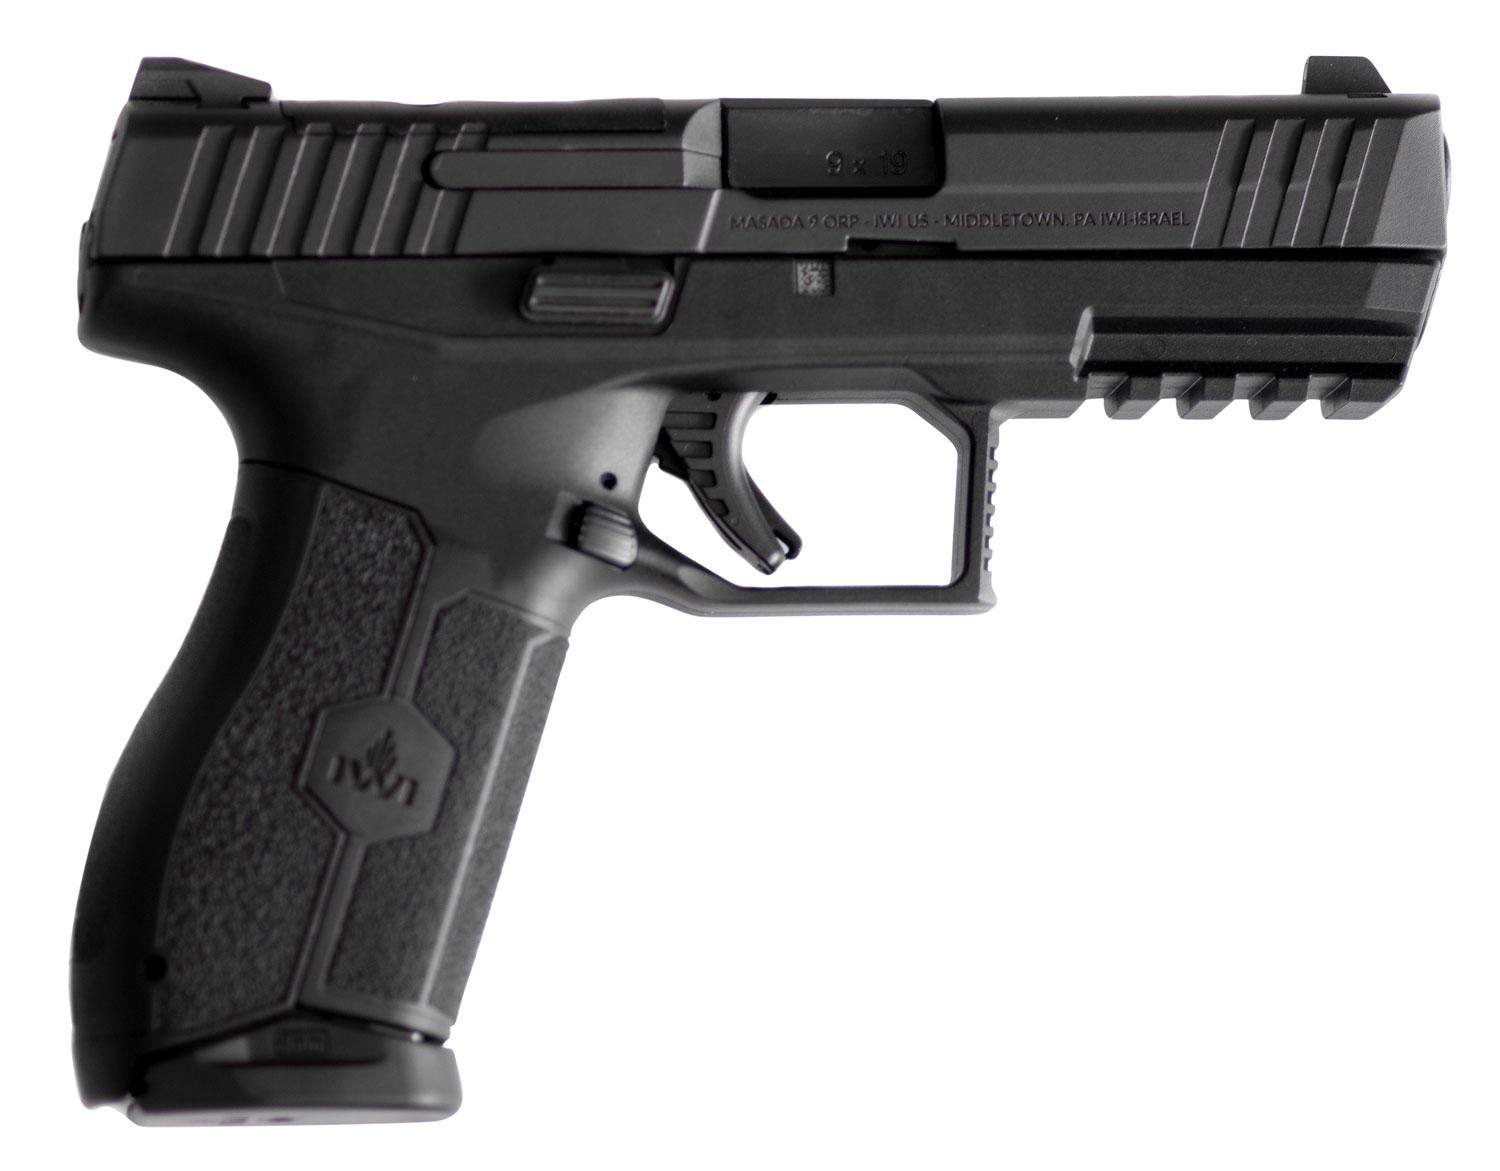 IWI MASADA Optic Ready Pistol M9OR10, 9mm Luger, 4.10", Polymer Grips, Black Finish, 10 Rds